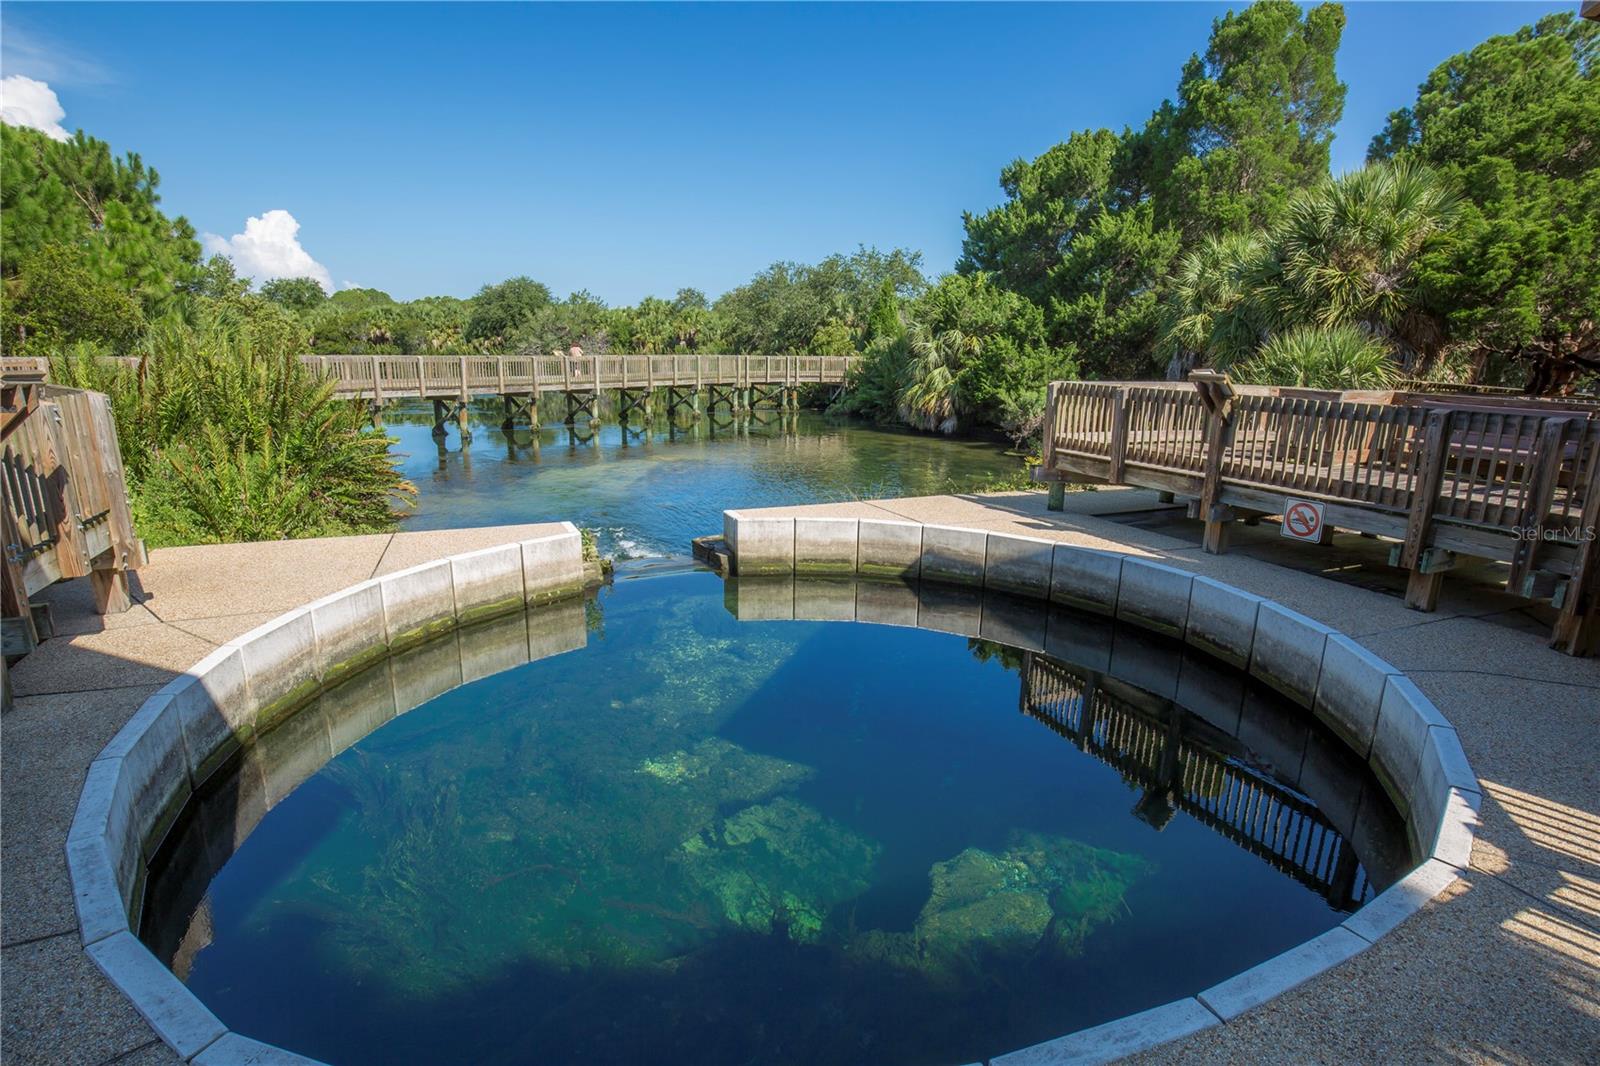 Wall Springs Park is across the street from the Highlands of Innisbrook with access to Pinellas Trail